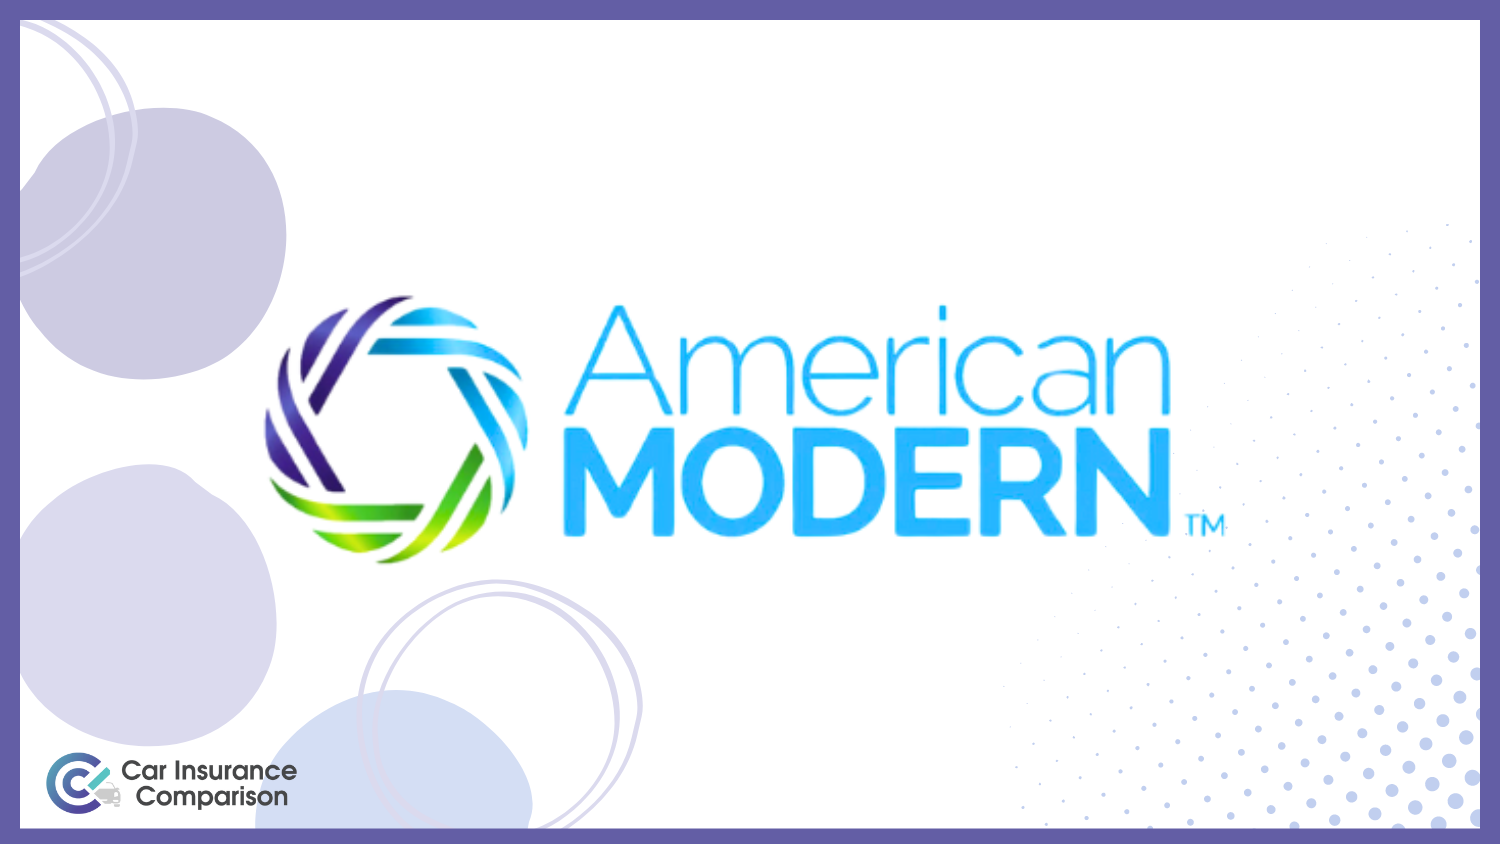 American Modern: Best Car Insurance for Specialty Vehicles